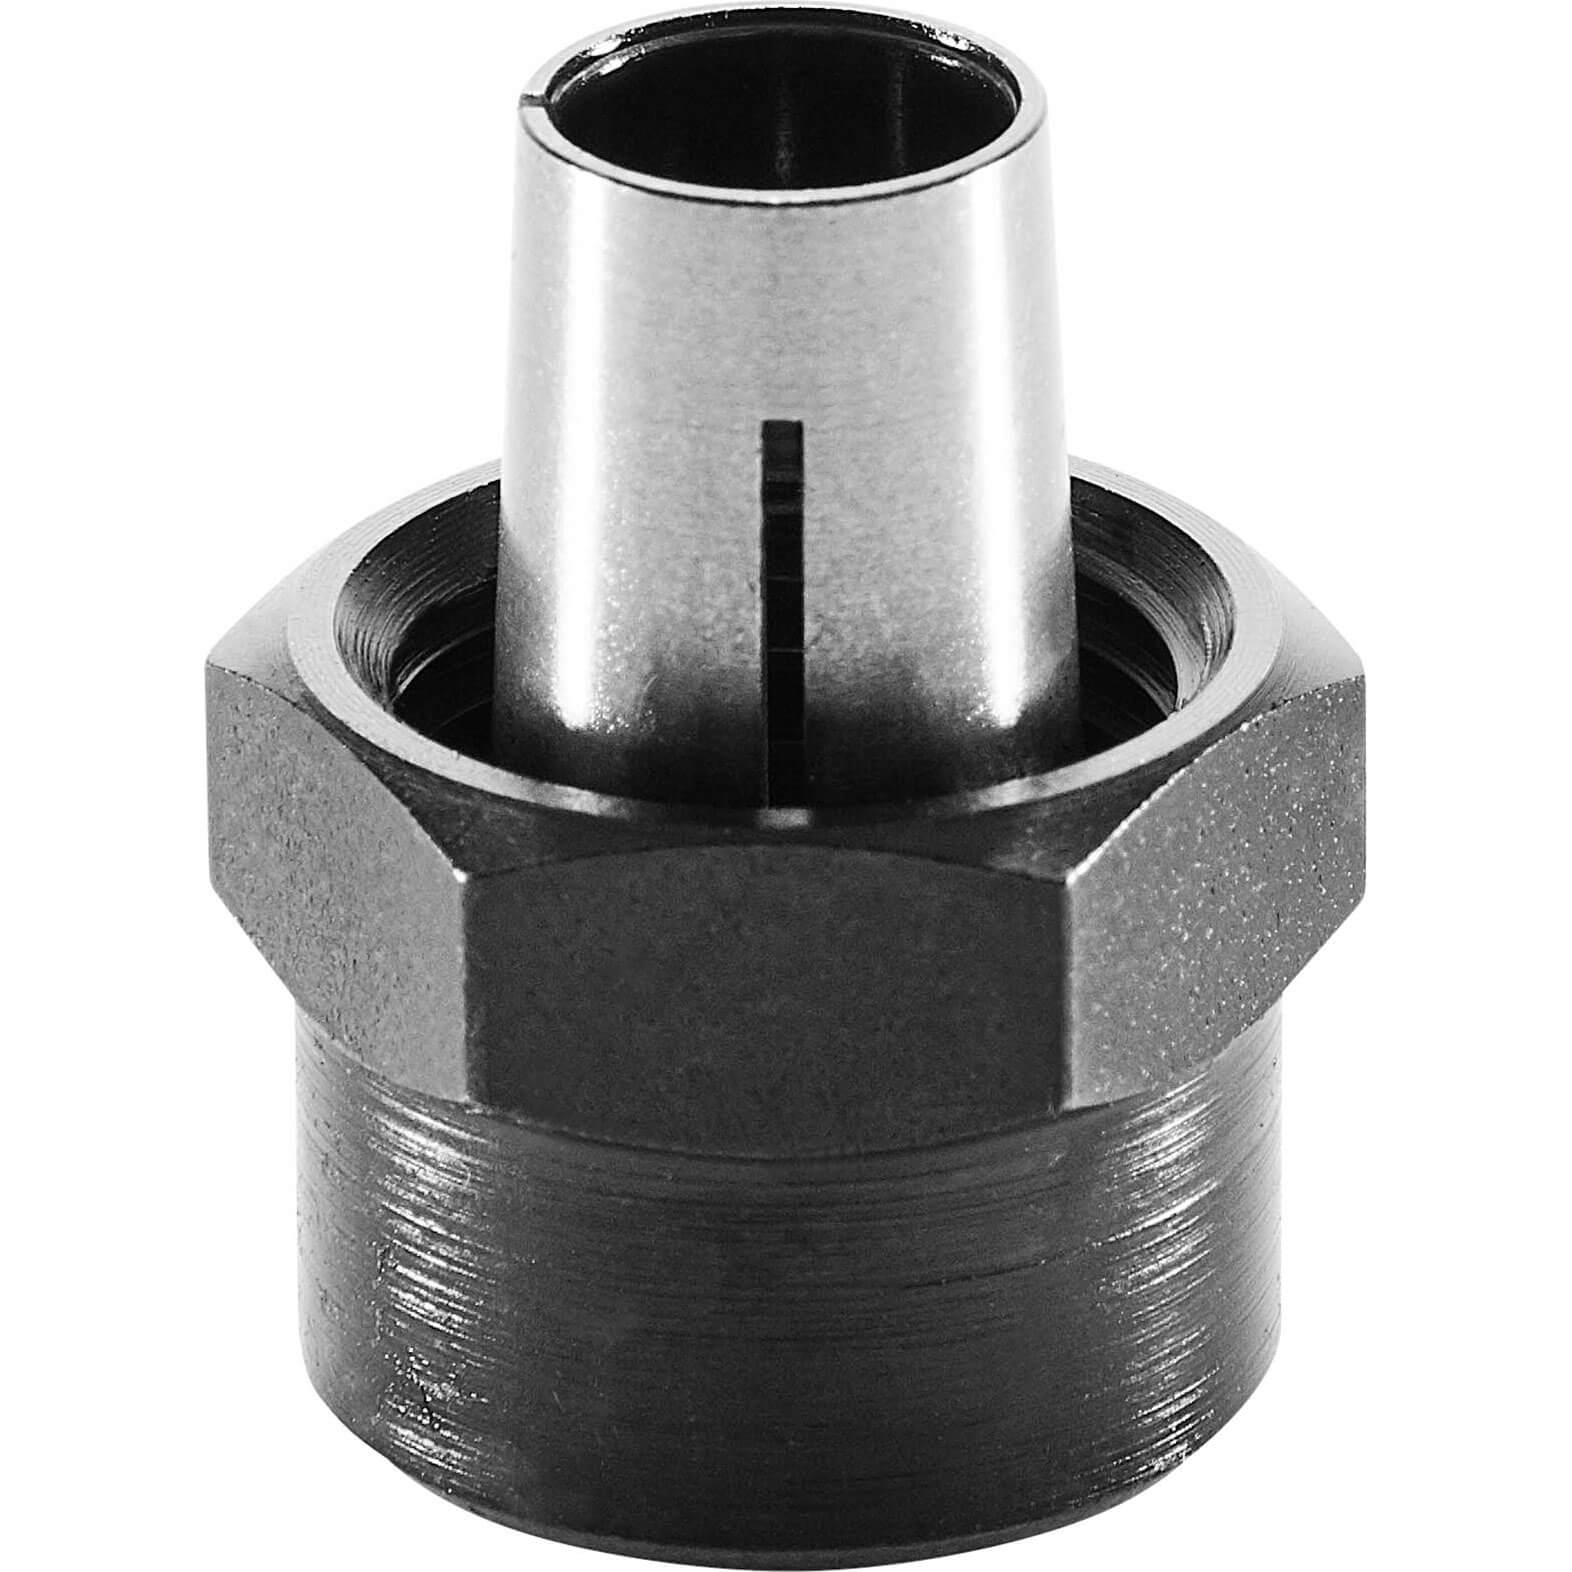 Image of Festool Router Collet For Festool Router OF1010 1/4"